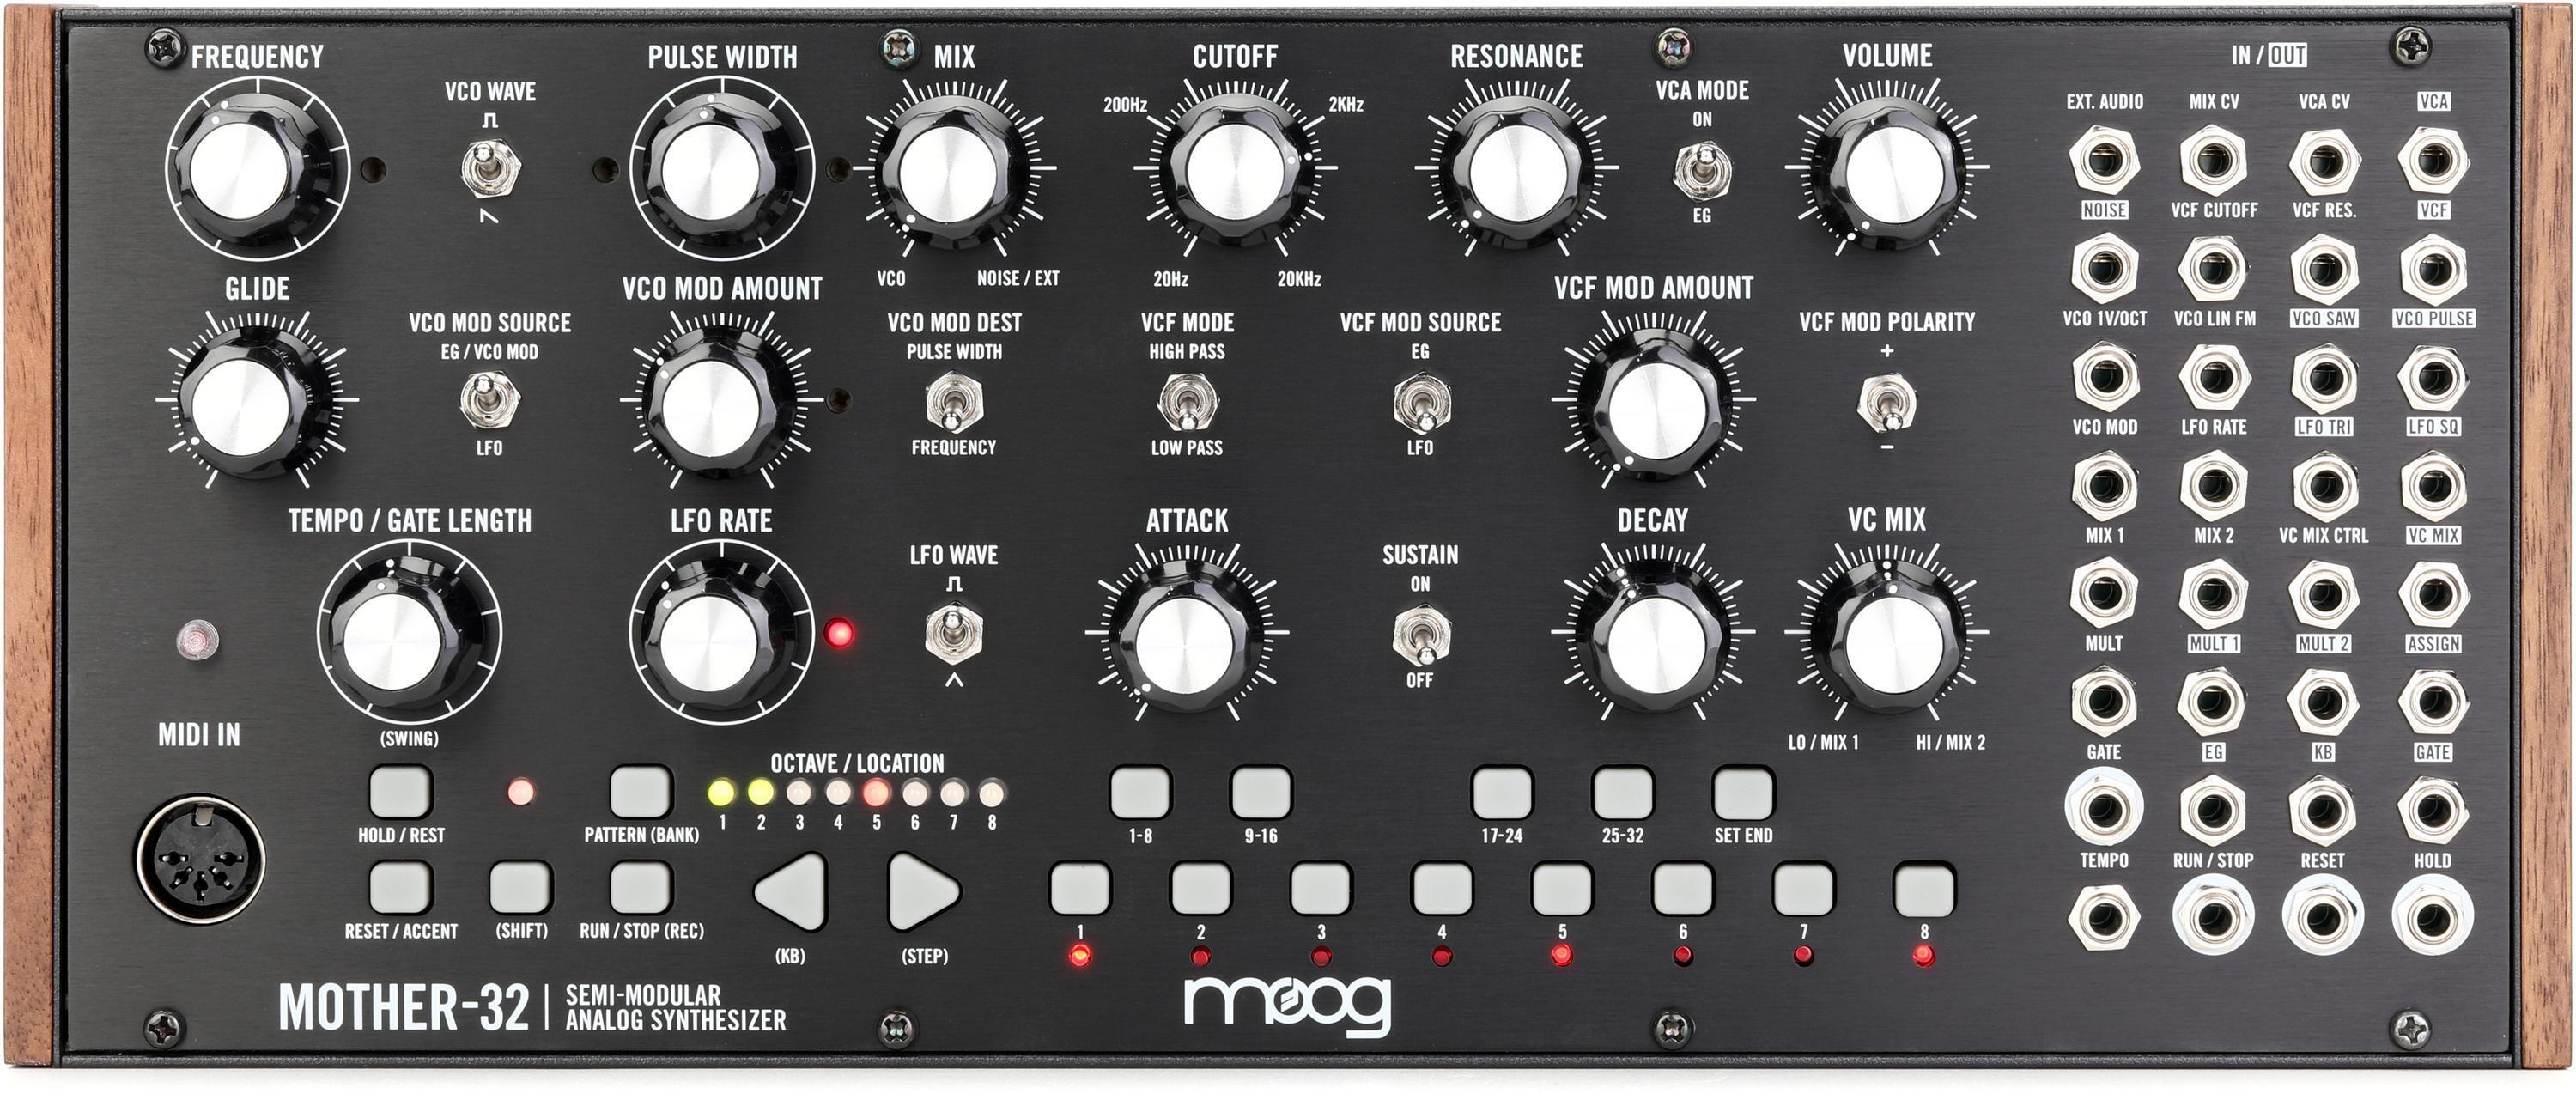 Moog Mother-32 Semi-modular Eurorack Analog Synthesizer and Step Sequencer